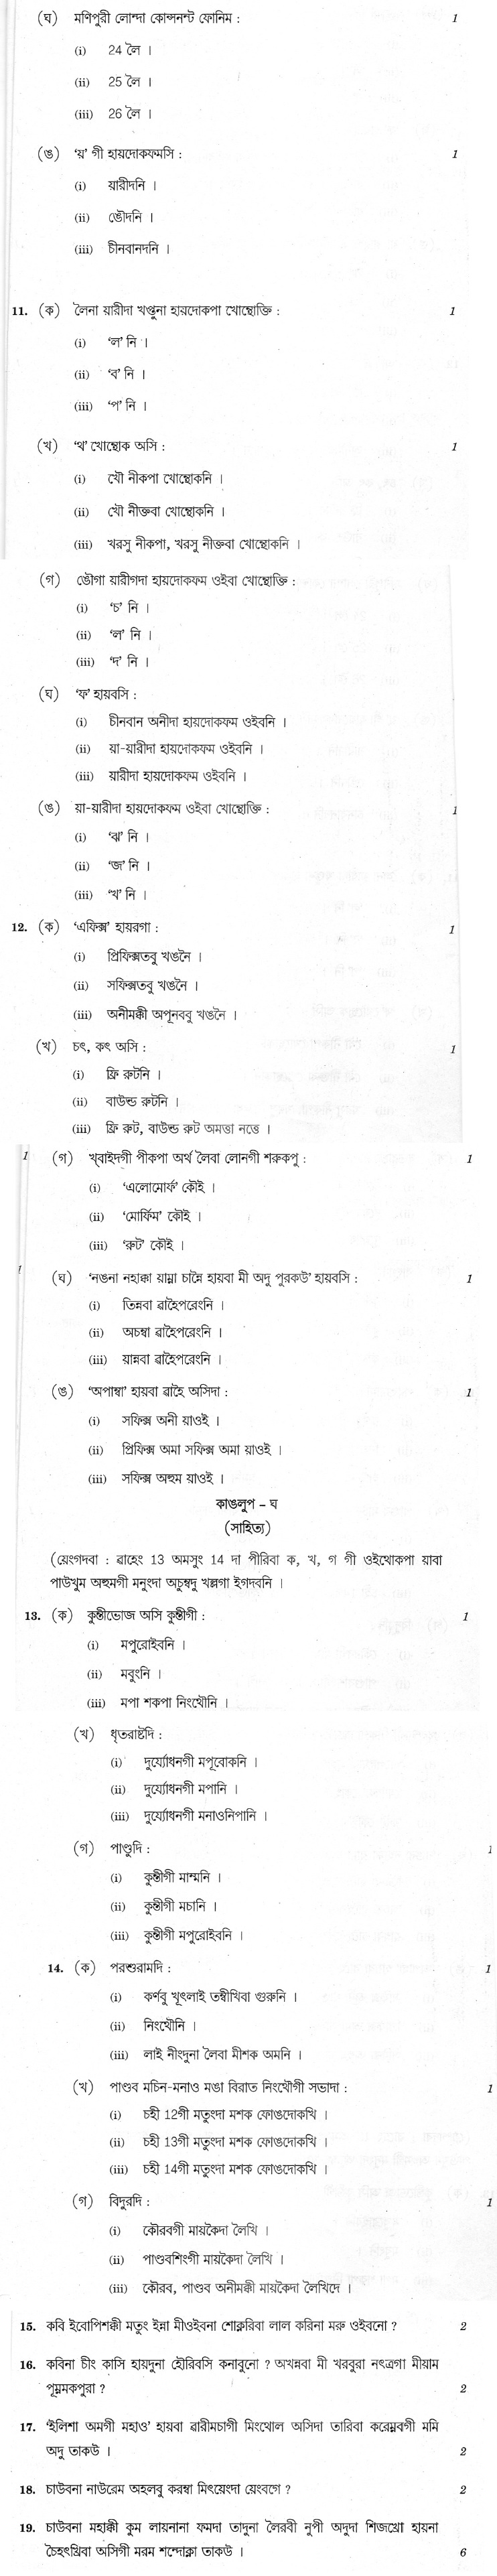 CBSE Class X Previous Year Question Papers 2012 Manipuri